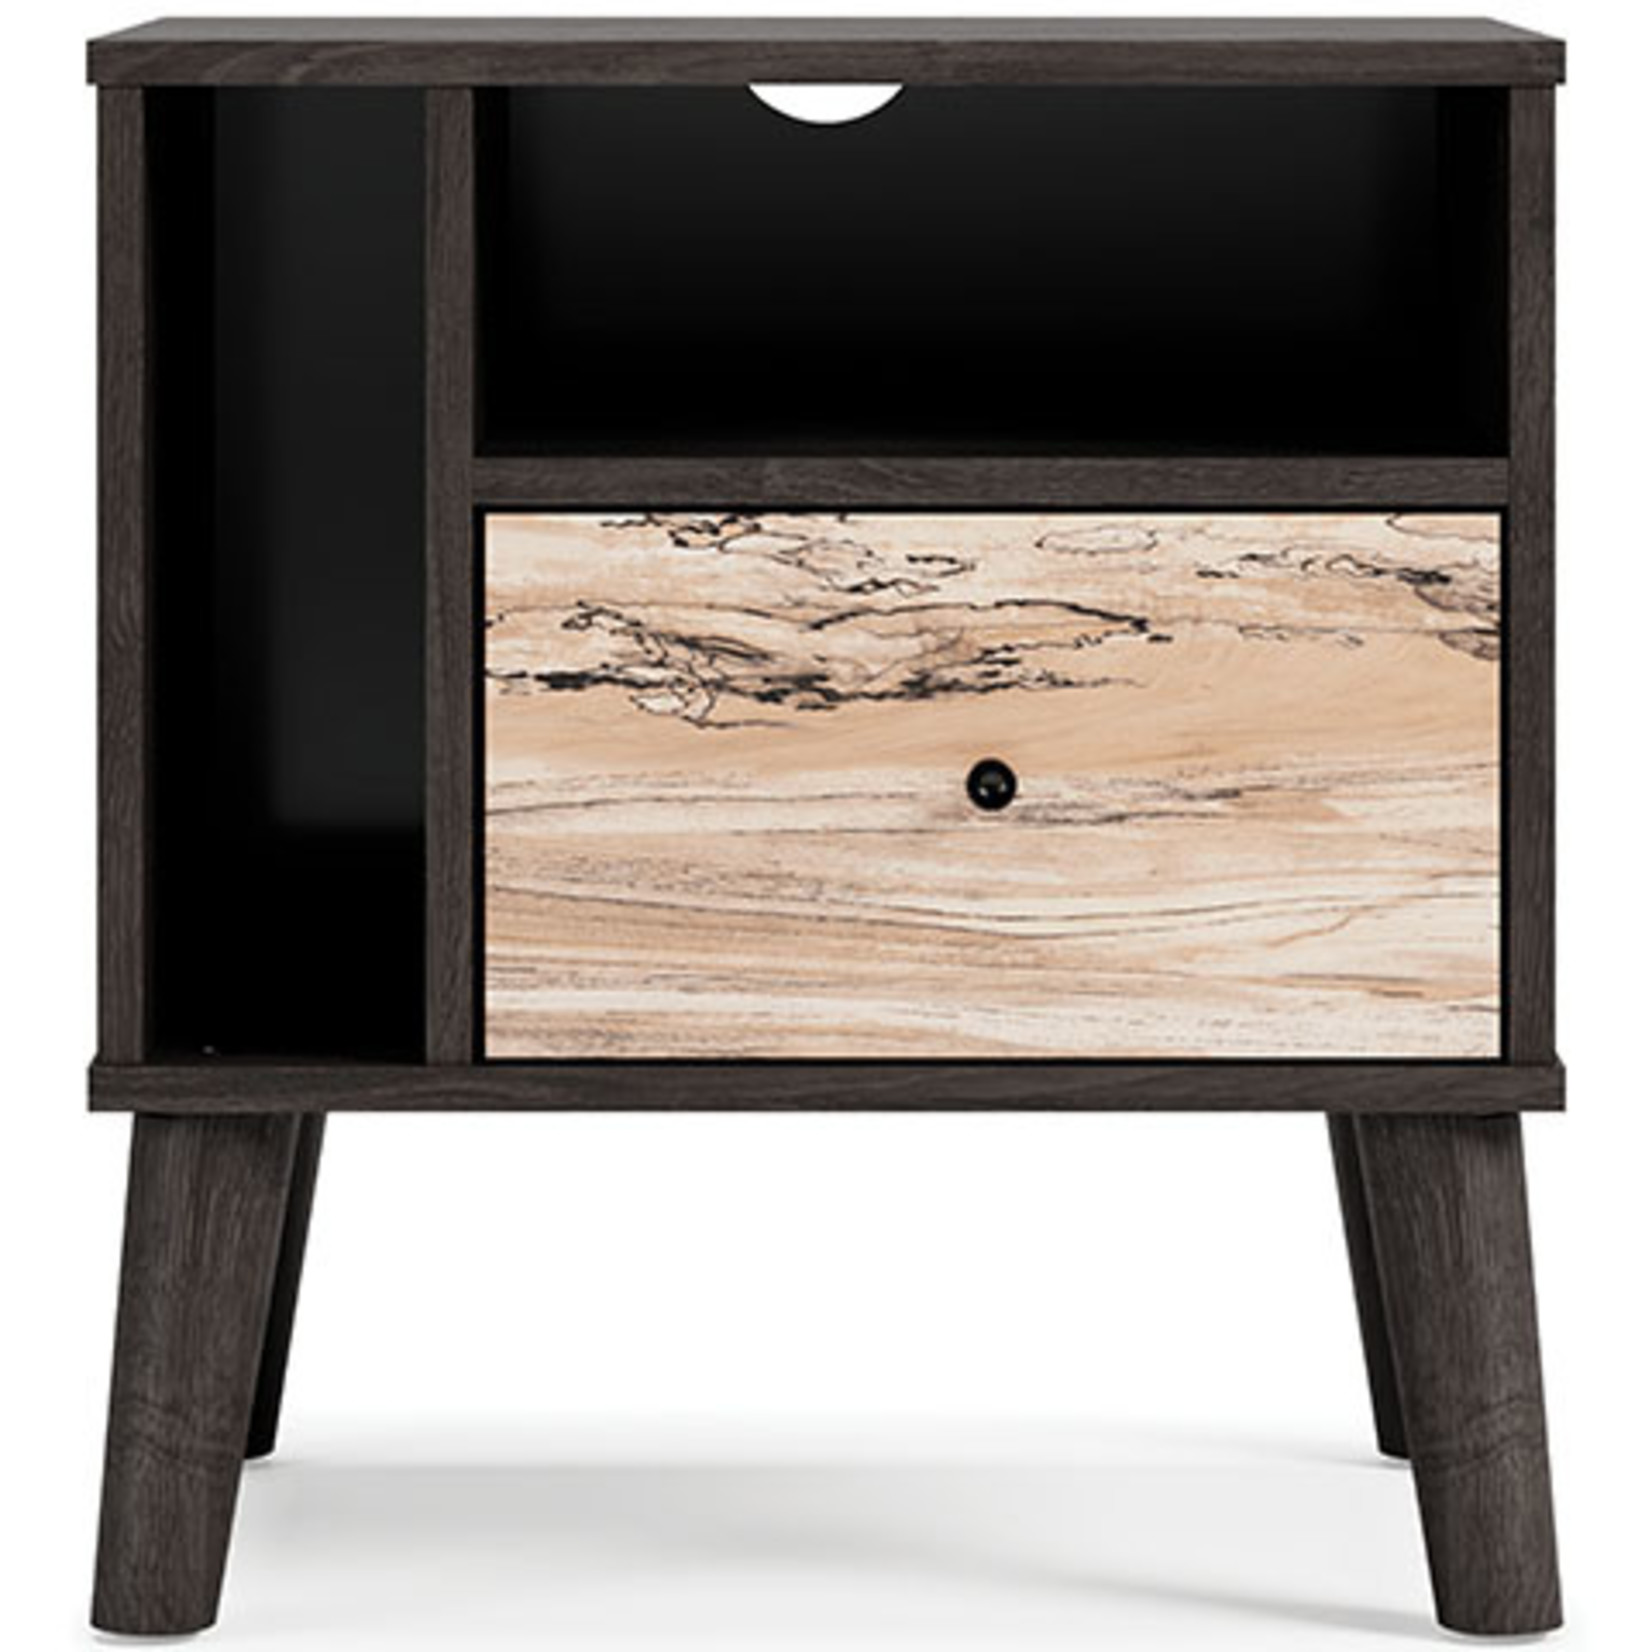 ASHLEY FURNITURE PIPERTON TWO TONED BLACK BROWN NIGHT STAND BY ASHLEY